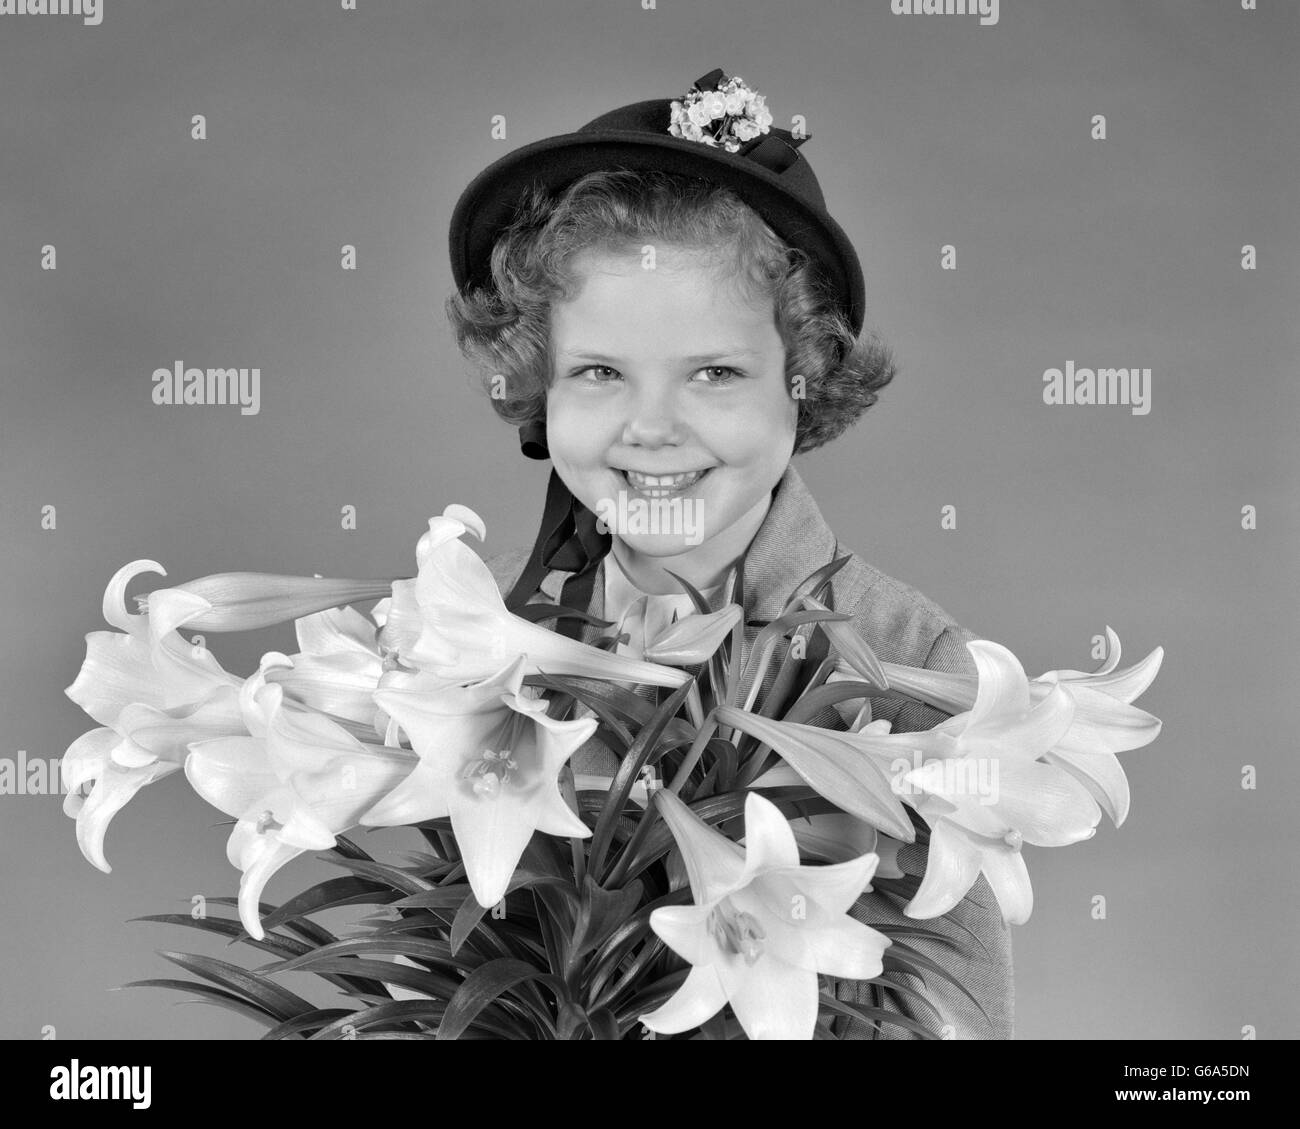 1950 PORTRAIT SMILING GIRL HOLDING EASTER LILIES Banque D'Images